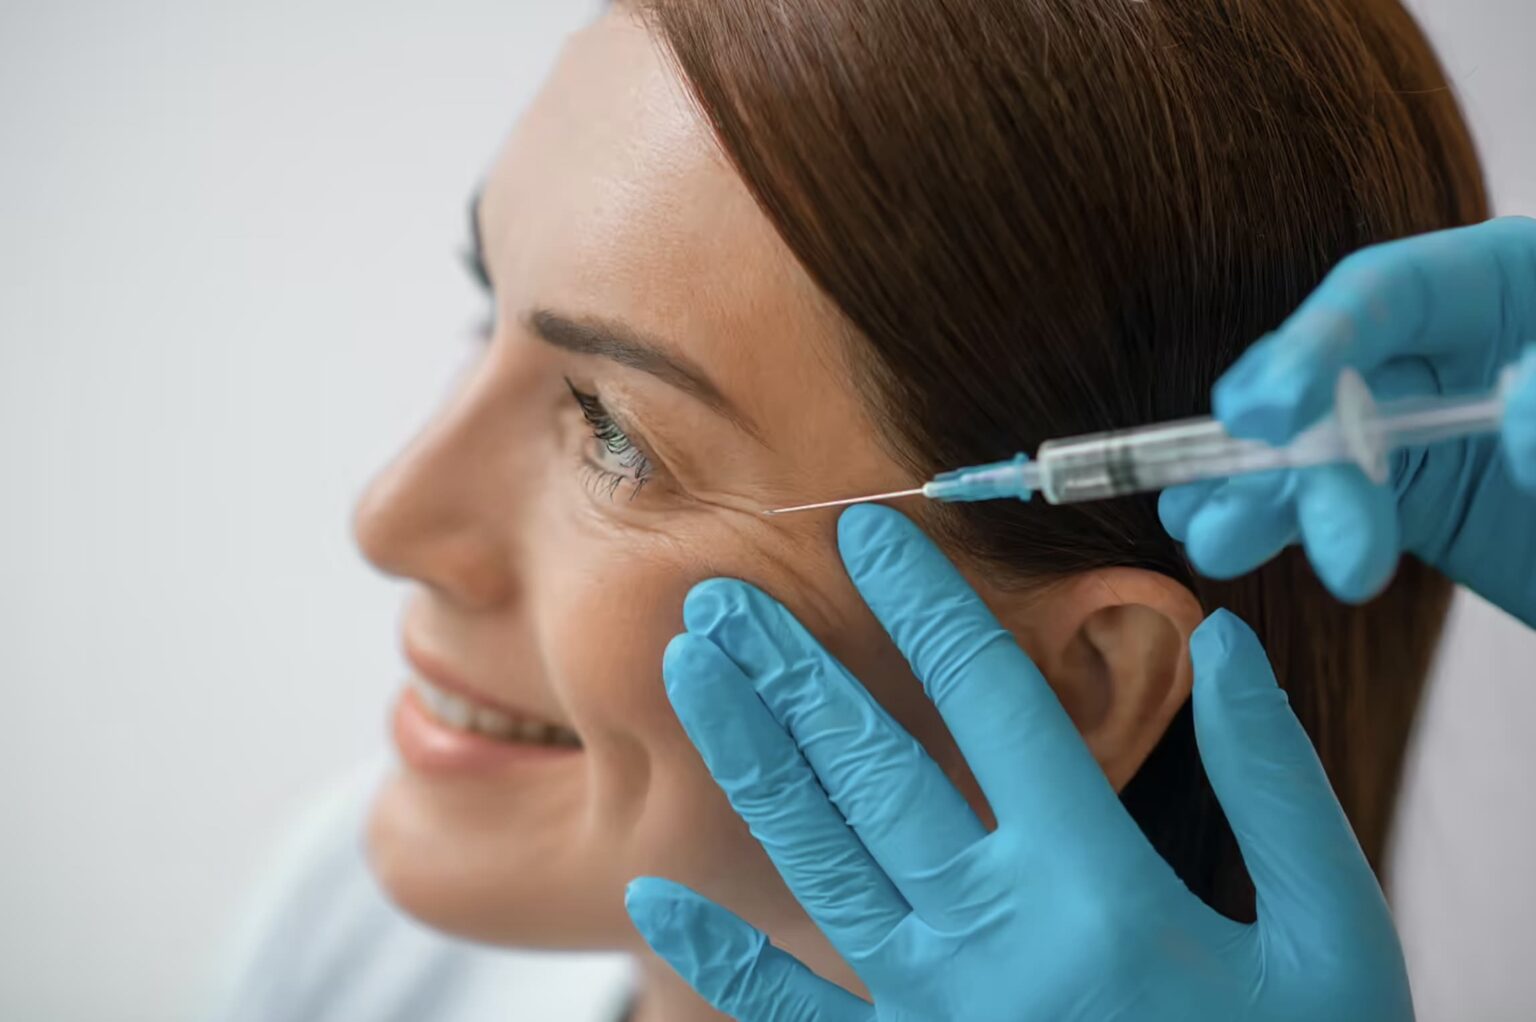 Are You Considering Botox? Here’s What You Should Know